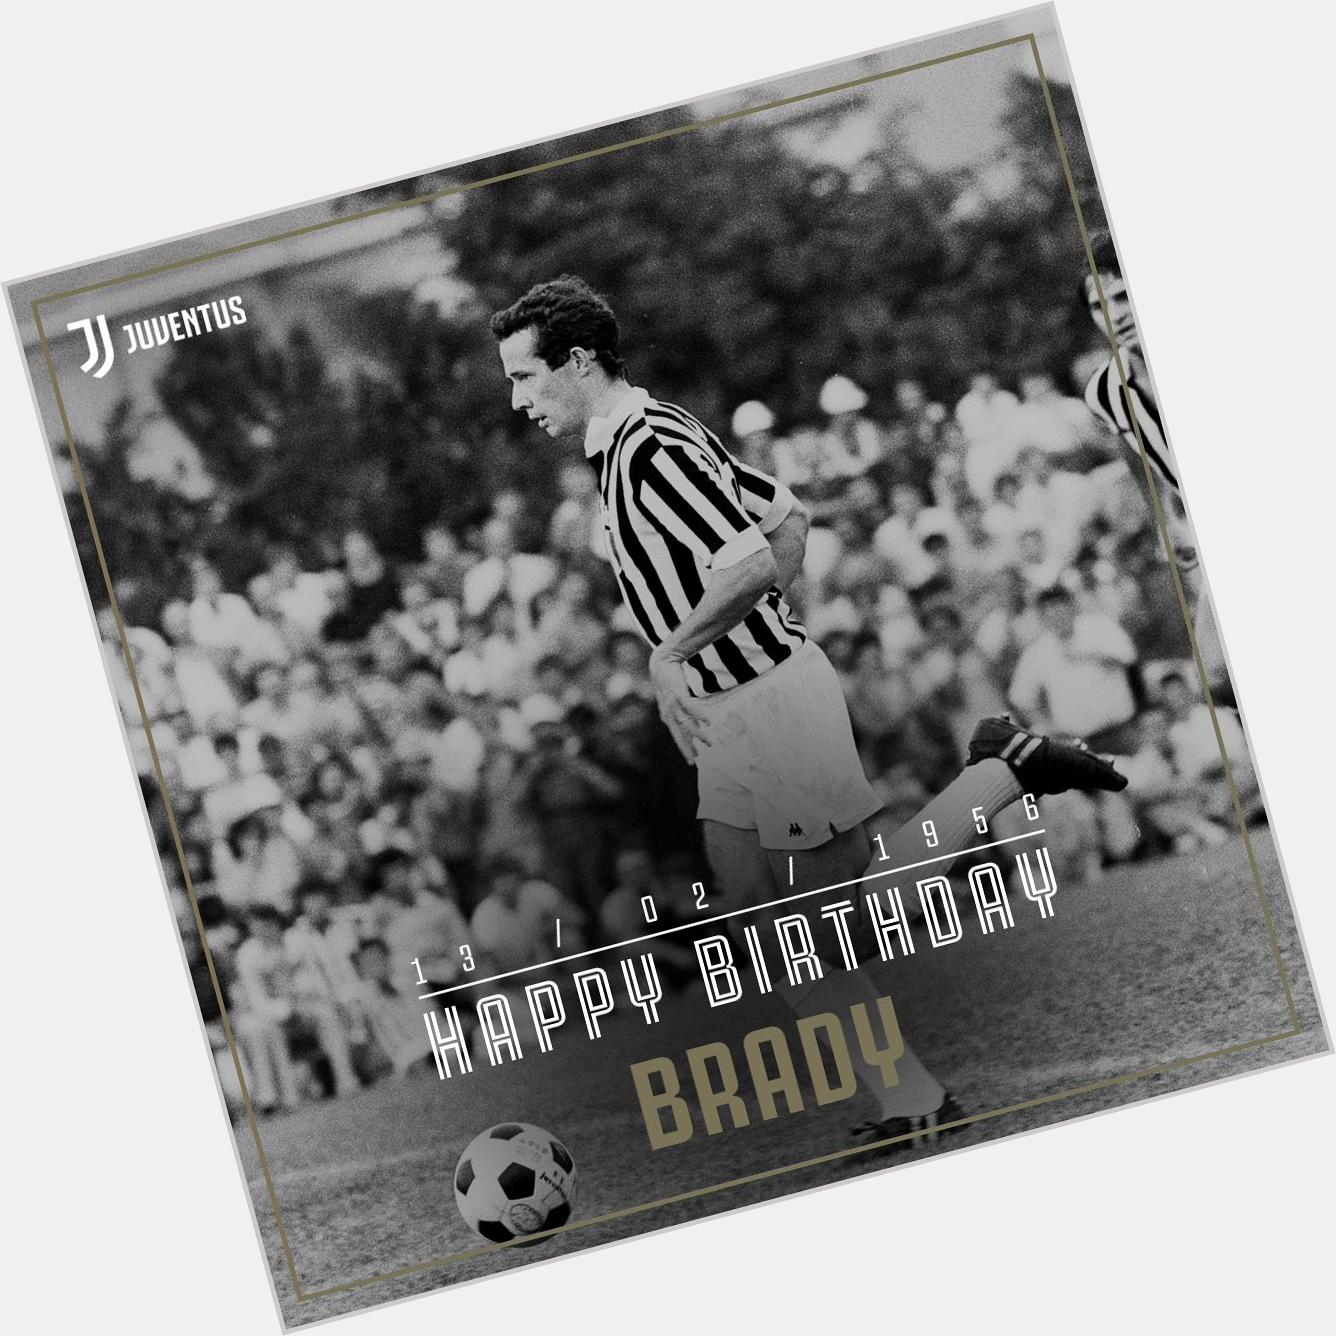 Two Scudetto wins along with an iconic Bianconeri moment      Happy birthday today to Liam Brady!    